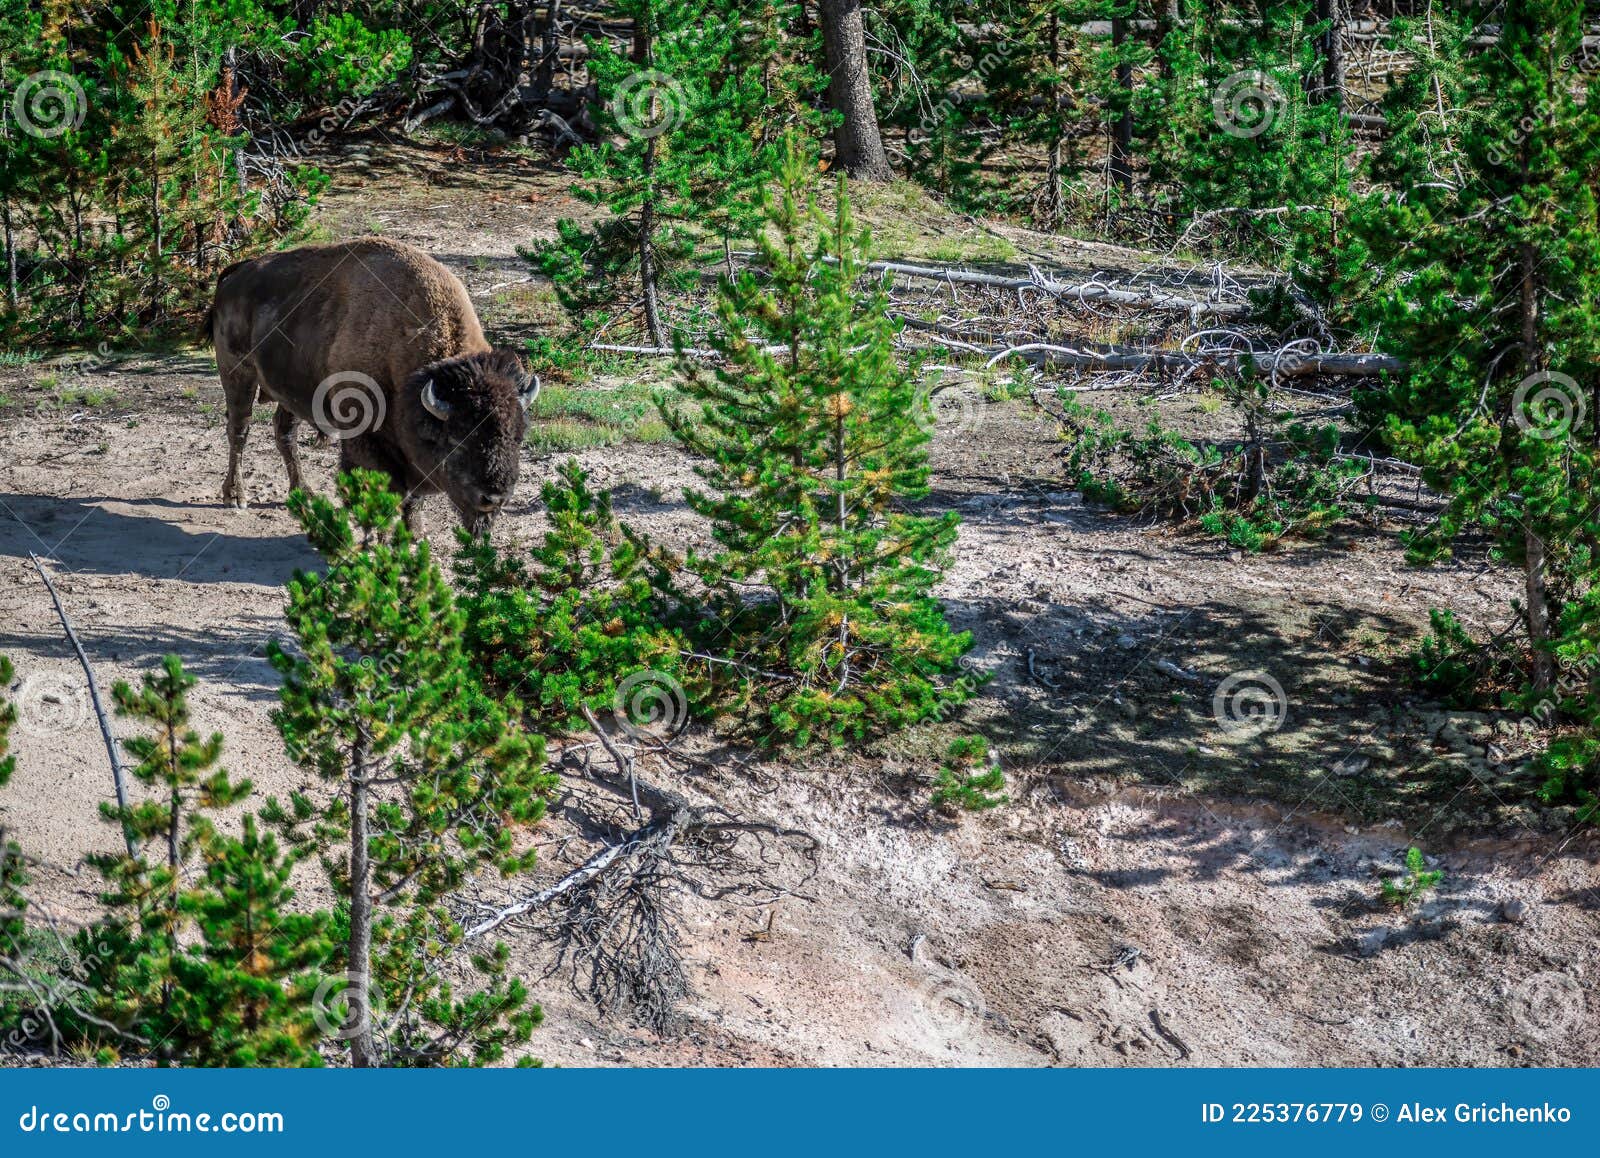 american bison buffalo in yellowstone national park